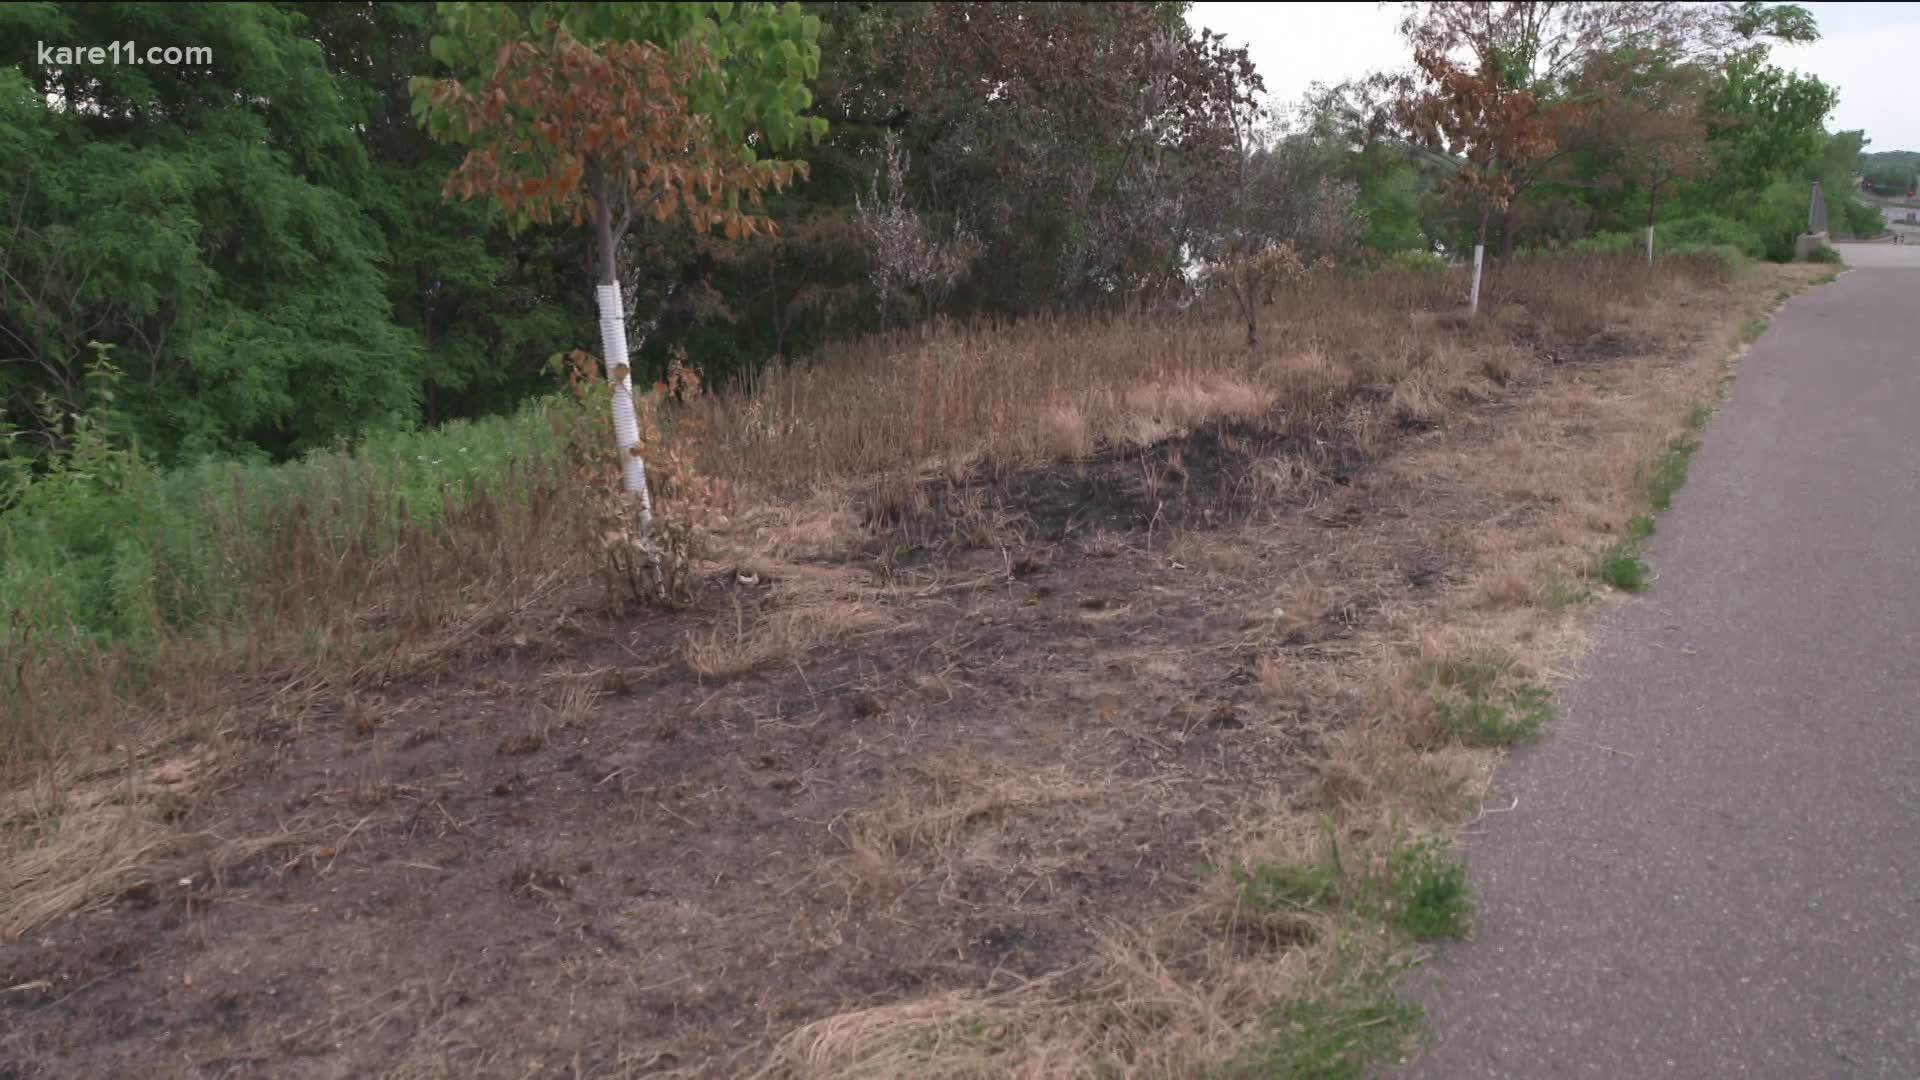 The Minnetonka Fire Department responded to nine grass fires in one week, which the fire chief says is higher than normal